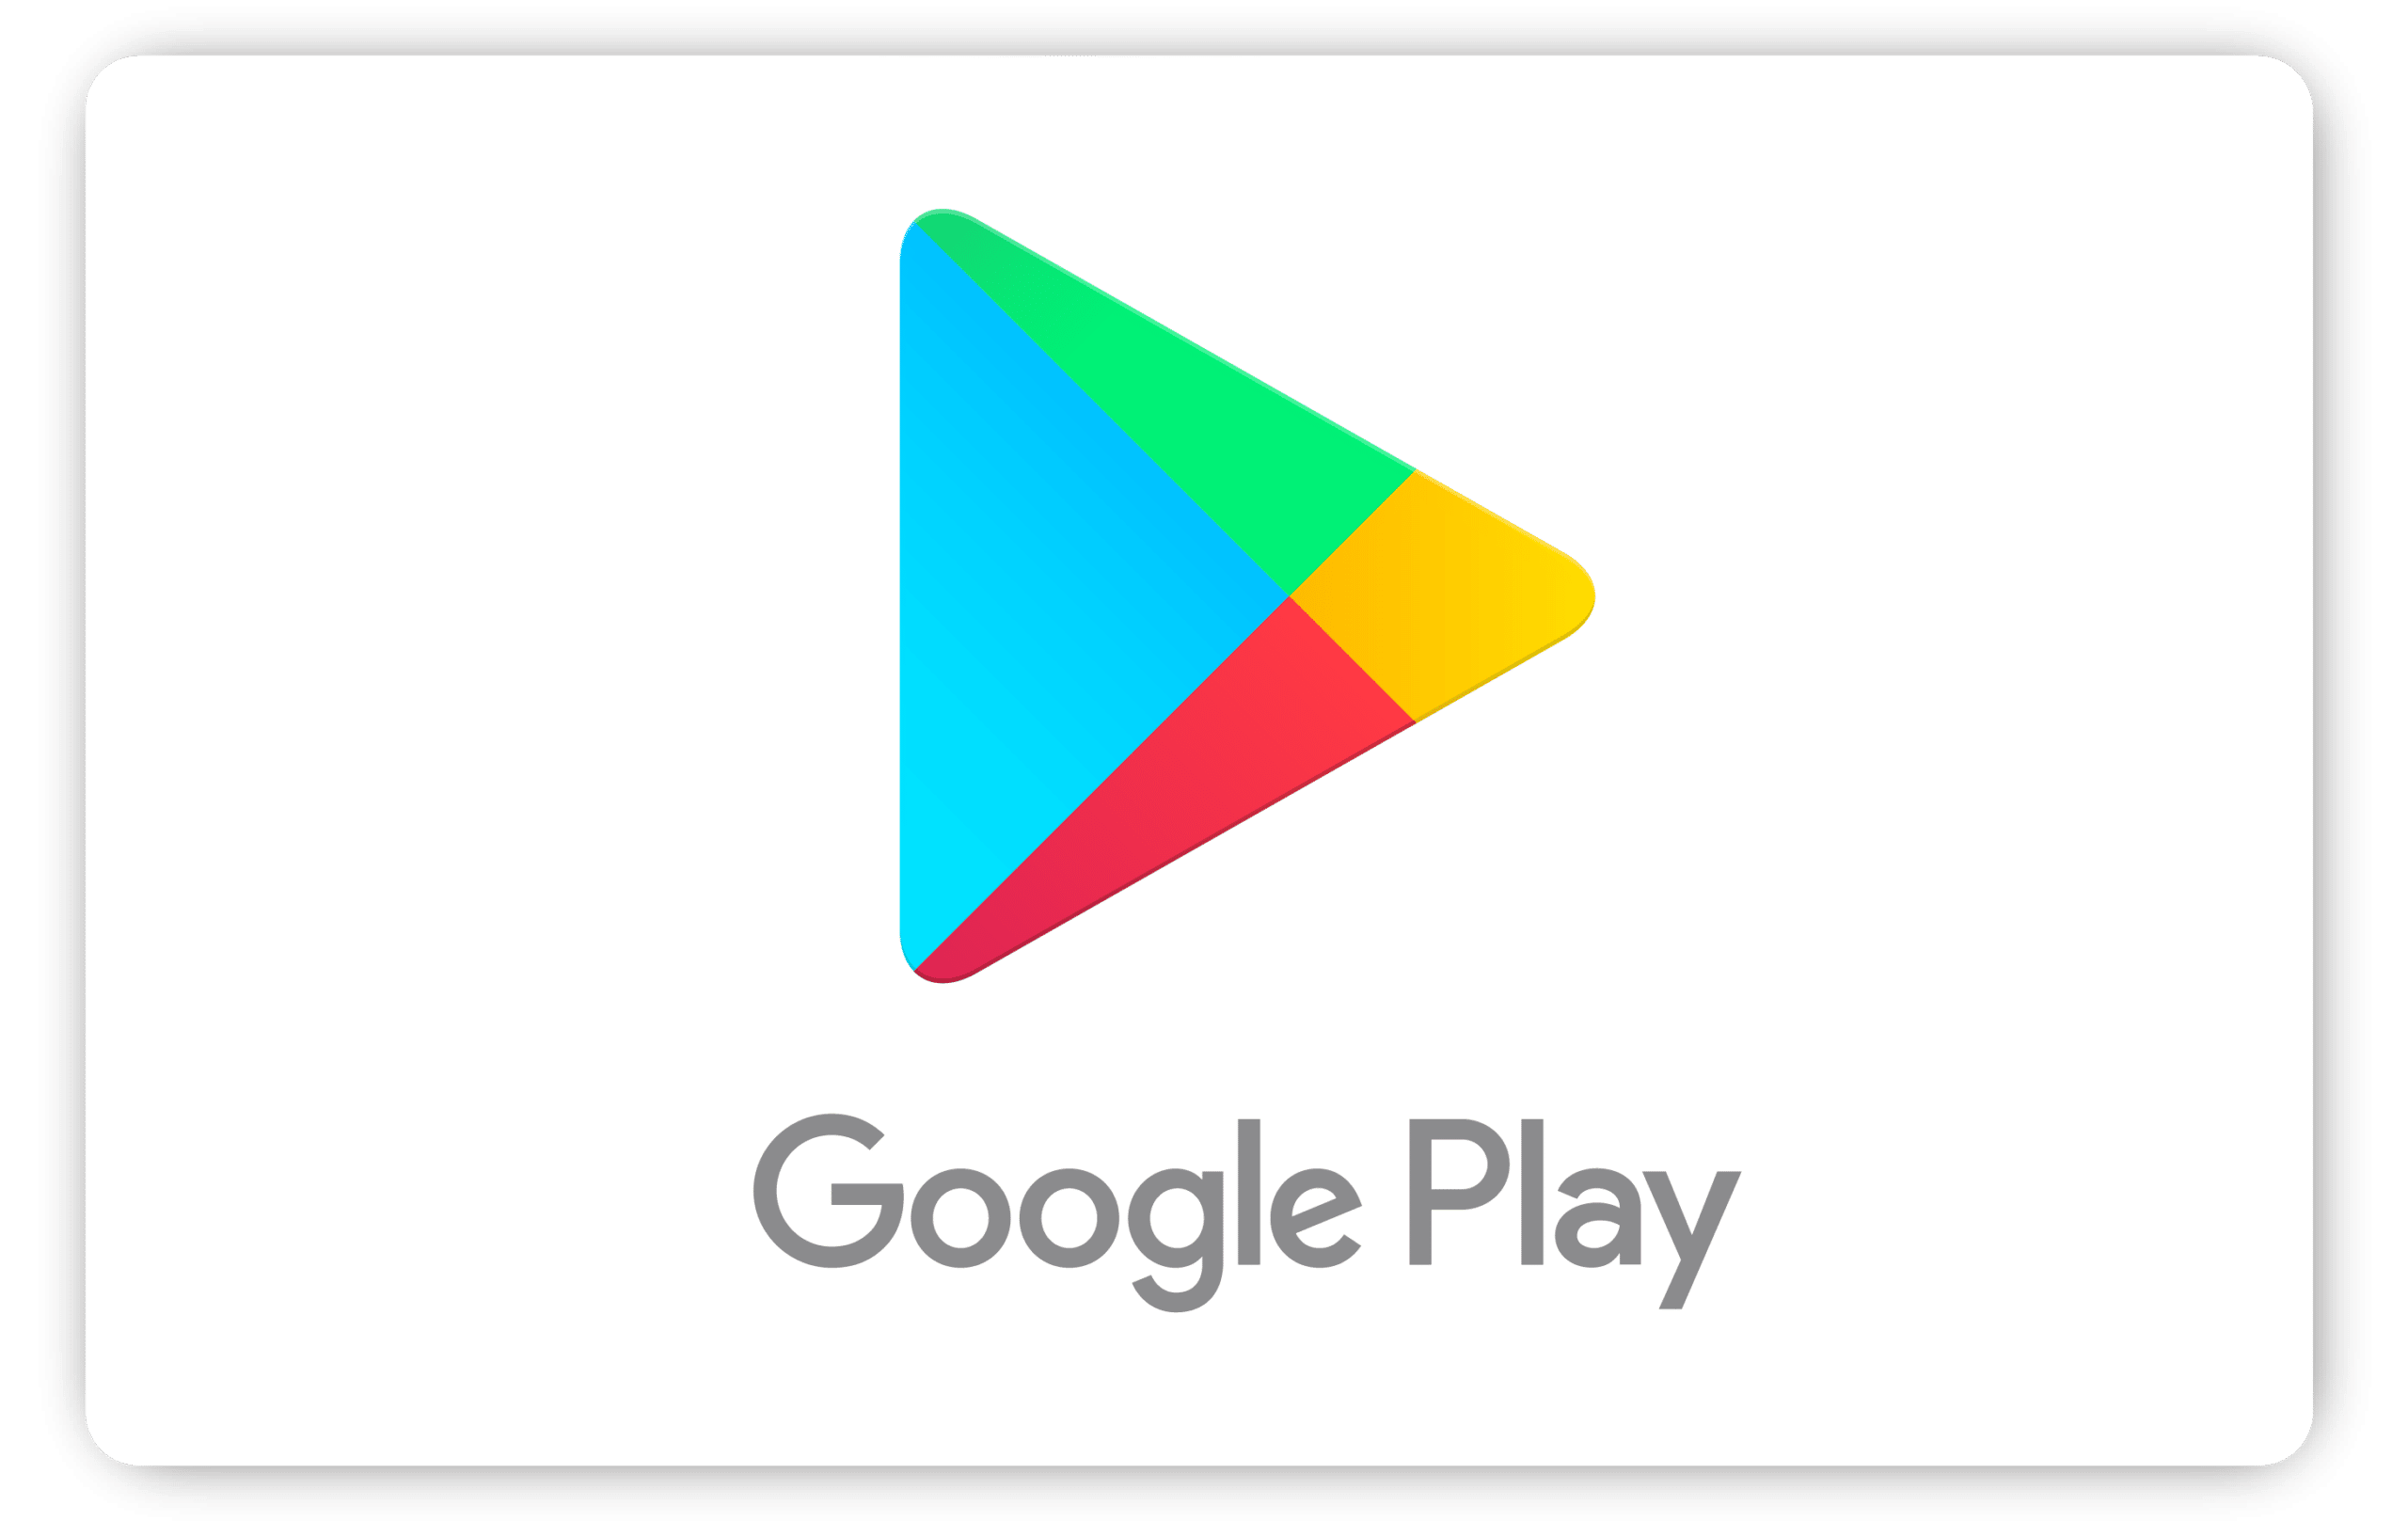 How to get free credits on Google Play?